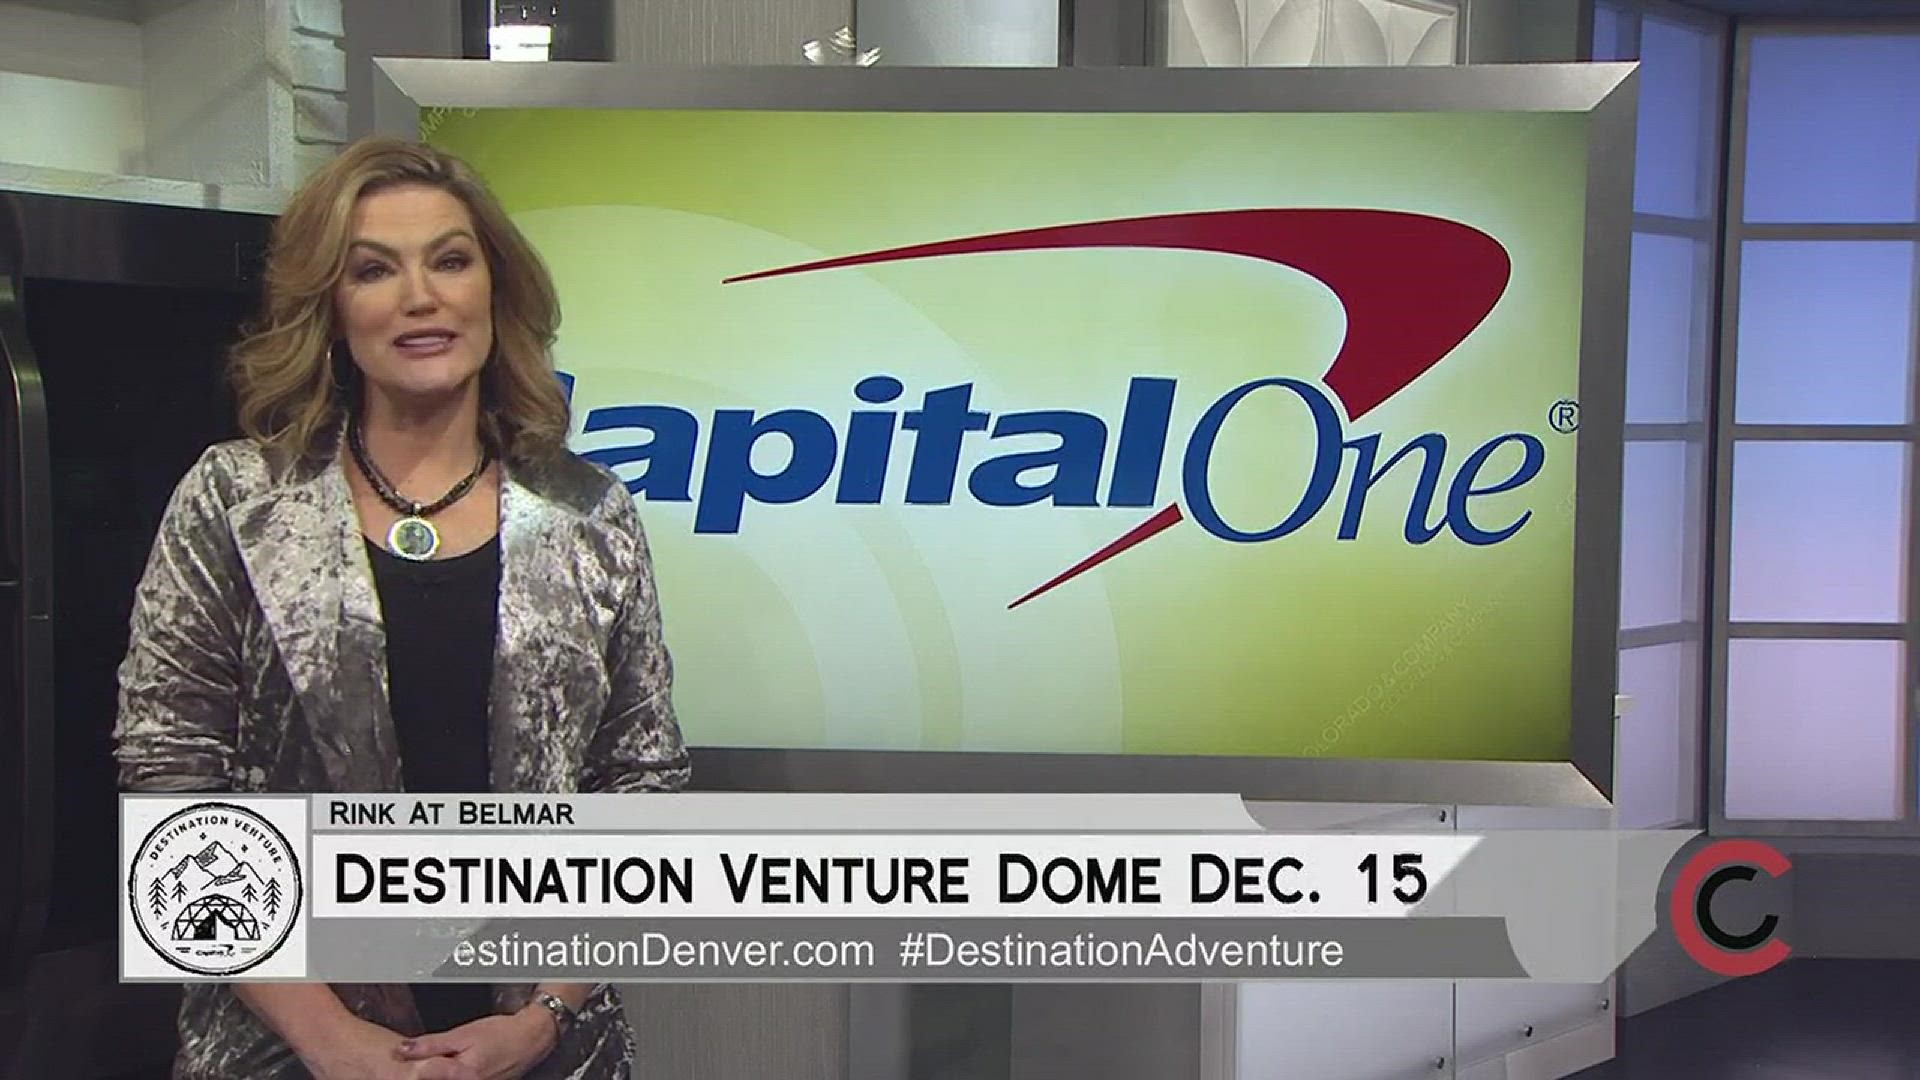 The Capital One Venture Card is designed to help people travel the way they want by offering unlimited double miles on every purchase, every day.  For more information about Destination Venture Dome in Belmar December 15 and 16, go to www.VisitDestinationVenture.com and follow the dome #DestinationVenture.  THIS INTERVIEW HAS COMMERCIAL CONTENT. PRODUCTS AND SERVICES FEATURED APPEAR AS PAID ADVERTISING.